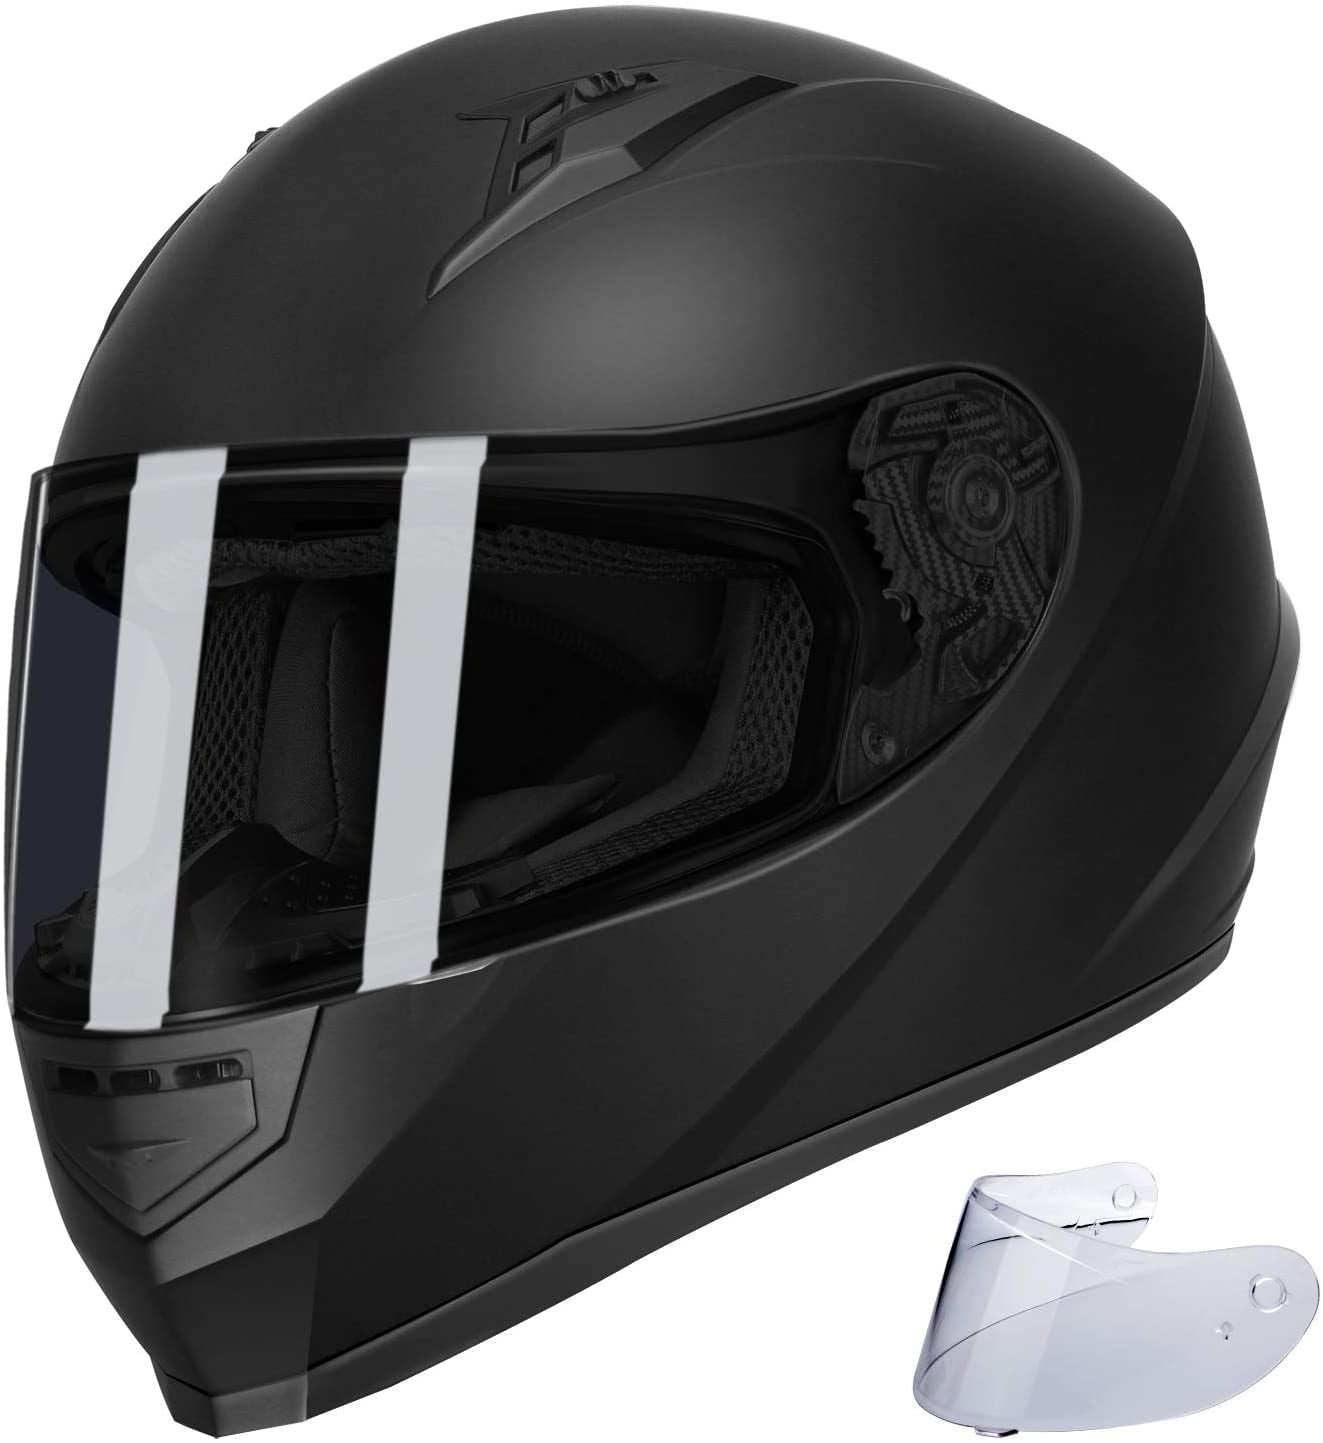 Glx Unisex Adult Gx11 Compact Lightweight Full Face Motorcycle Street Bike Helmet With Extra Tinted Visor Dot Approved Matte Black Large Walmart Com